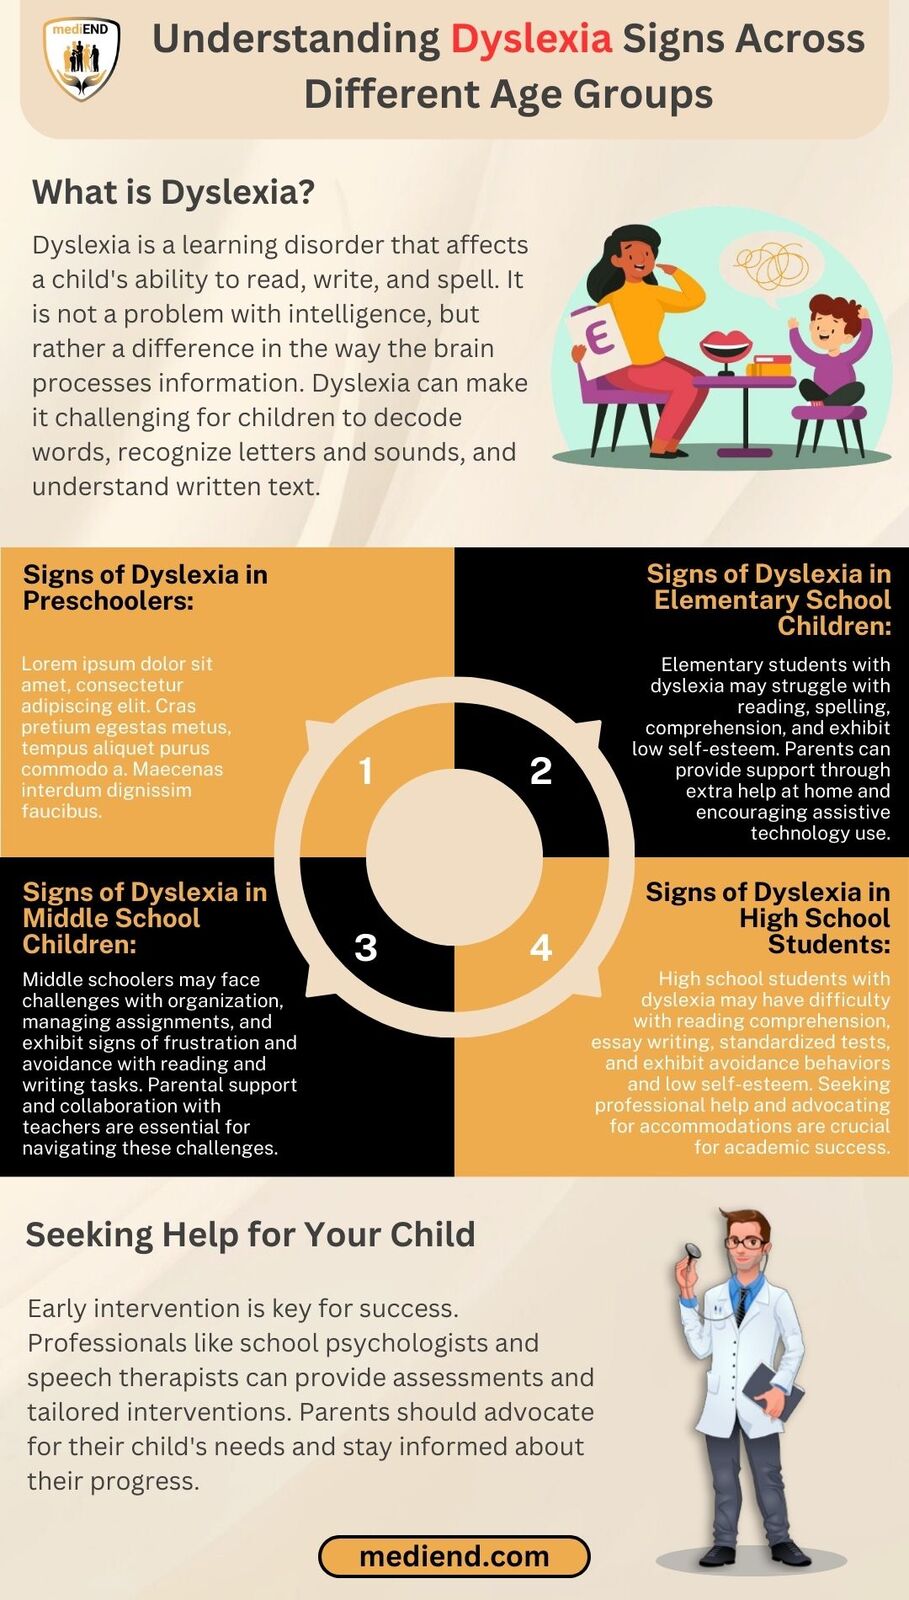 Is My Child Dyslexic? Signs of Dyslexia by Age Group